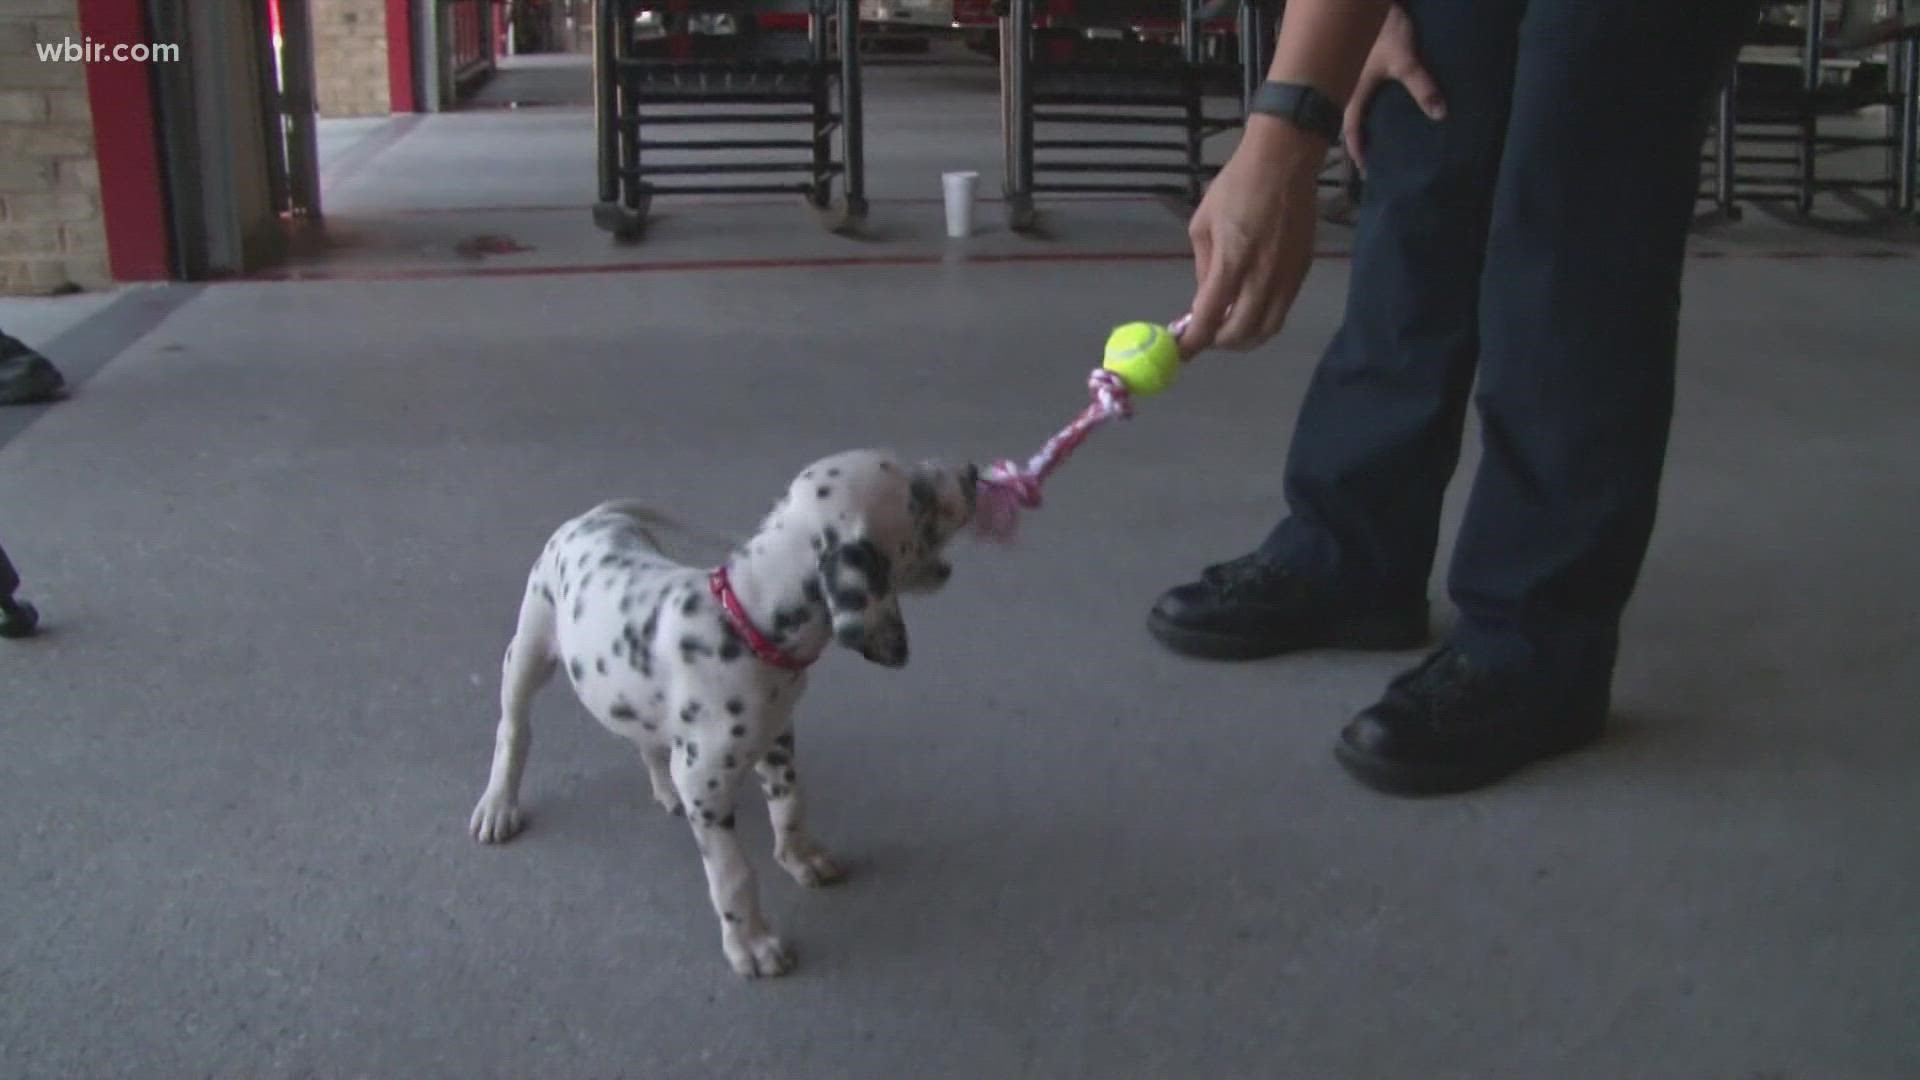 Officials with the fire department said Ember spent most of the day exploring her new home, playing with toys and giving her new team lots of love.